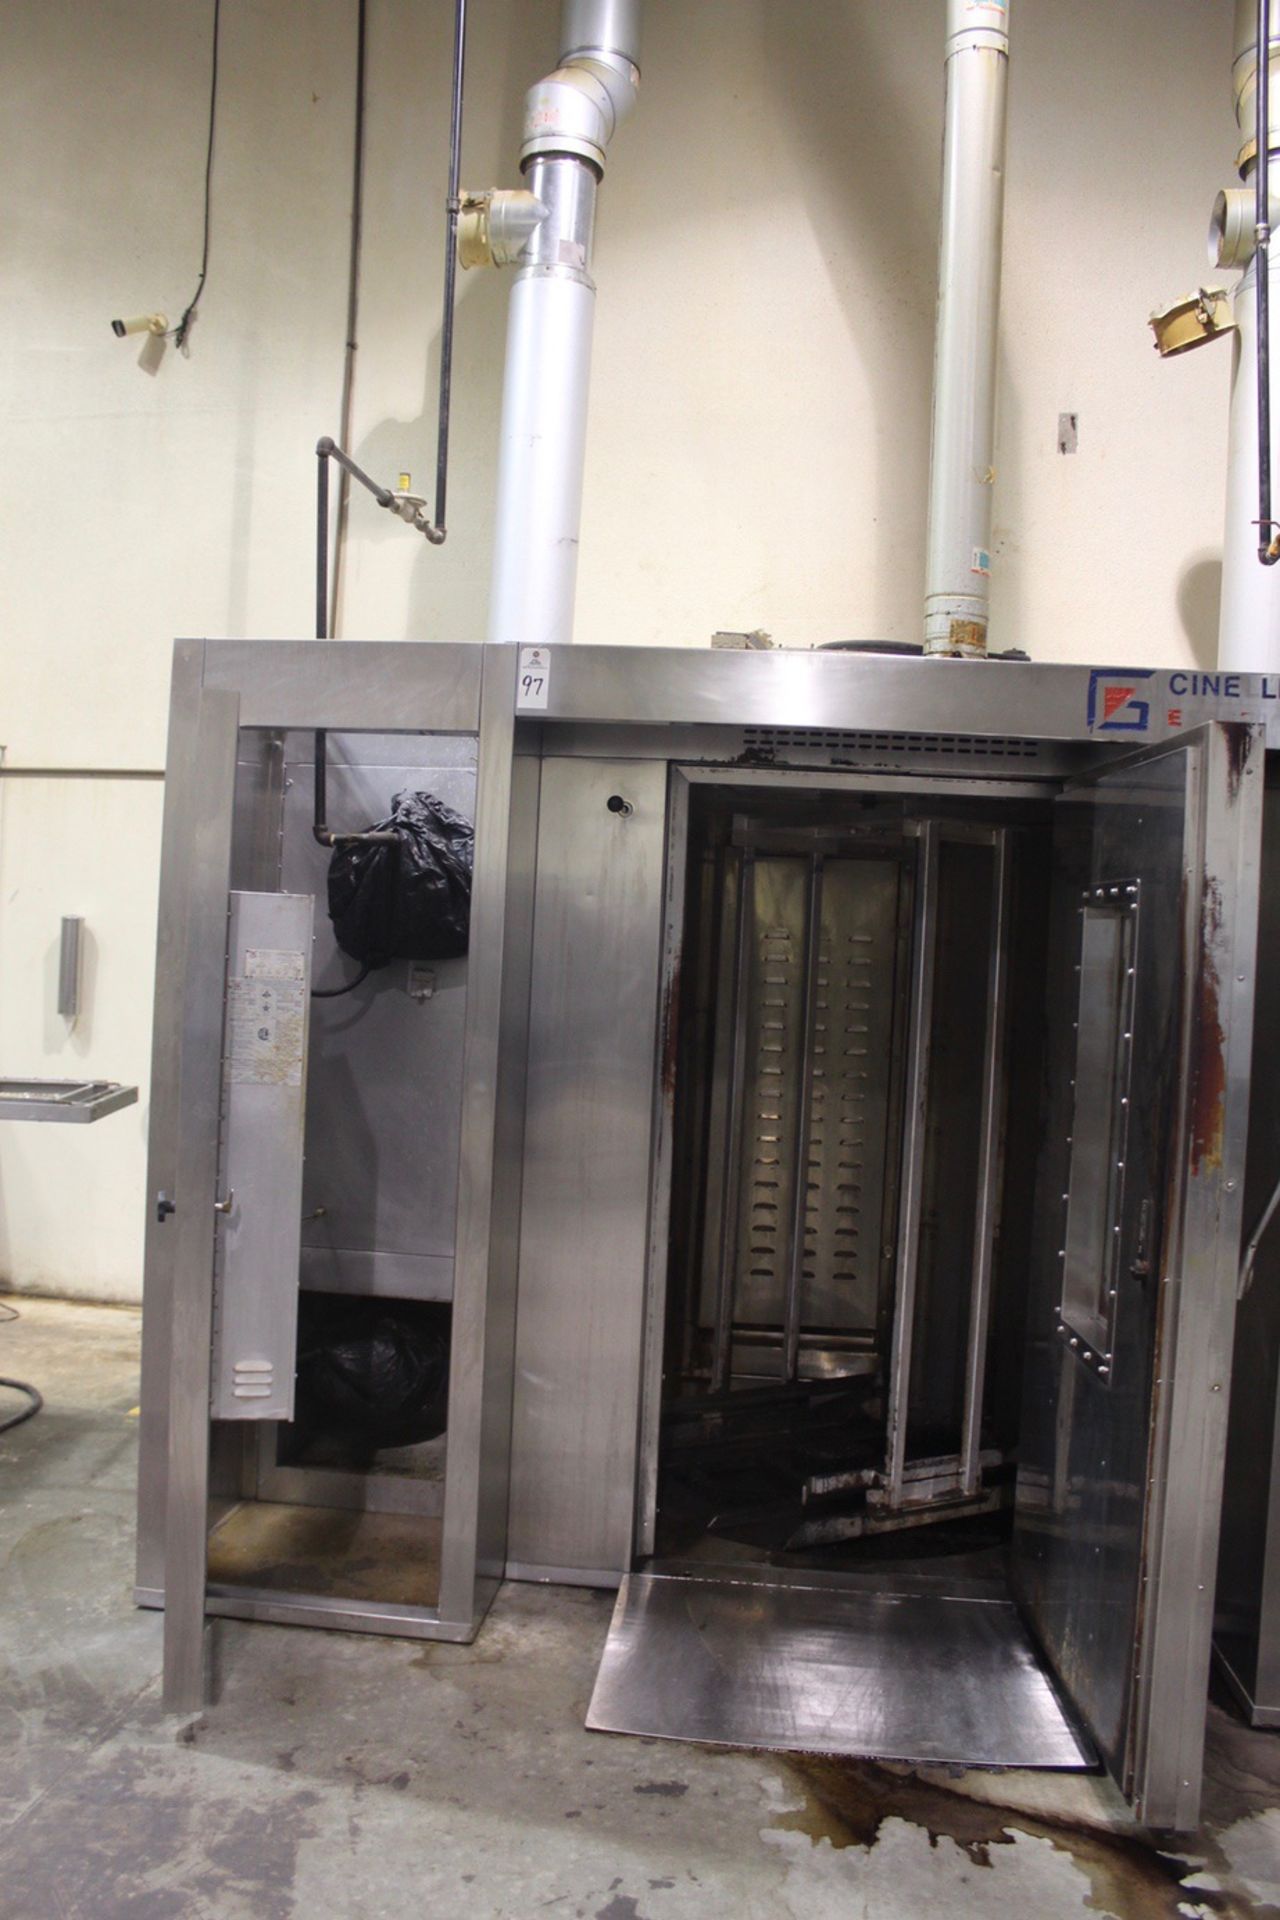 Cinelli Esperia Agas Fired Rotating Single Rack Oven, M# CG/1D, S/N 1303-260 | Rigging and Load